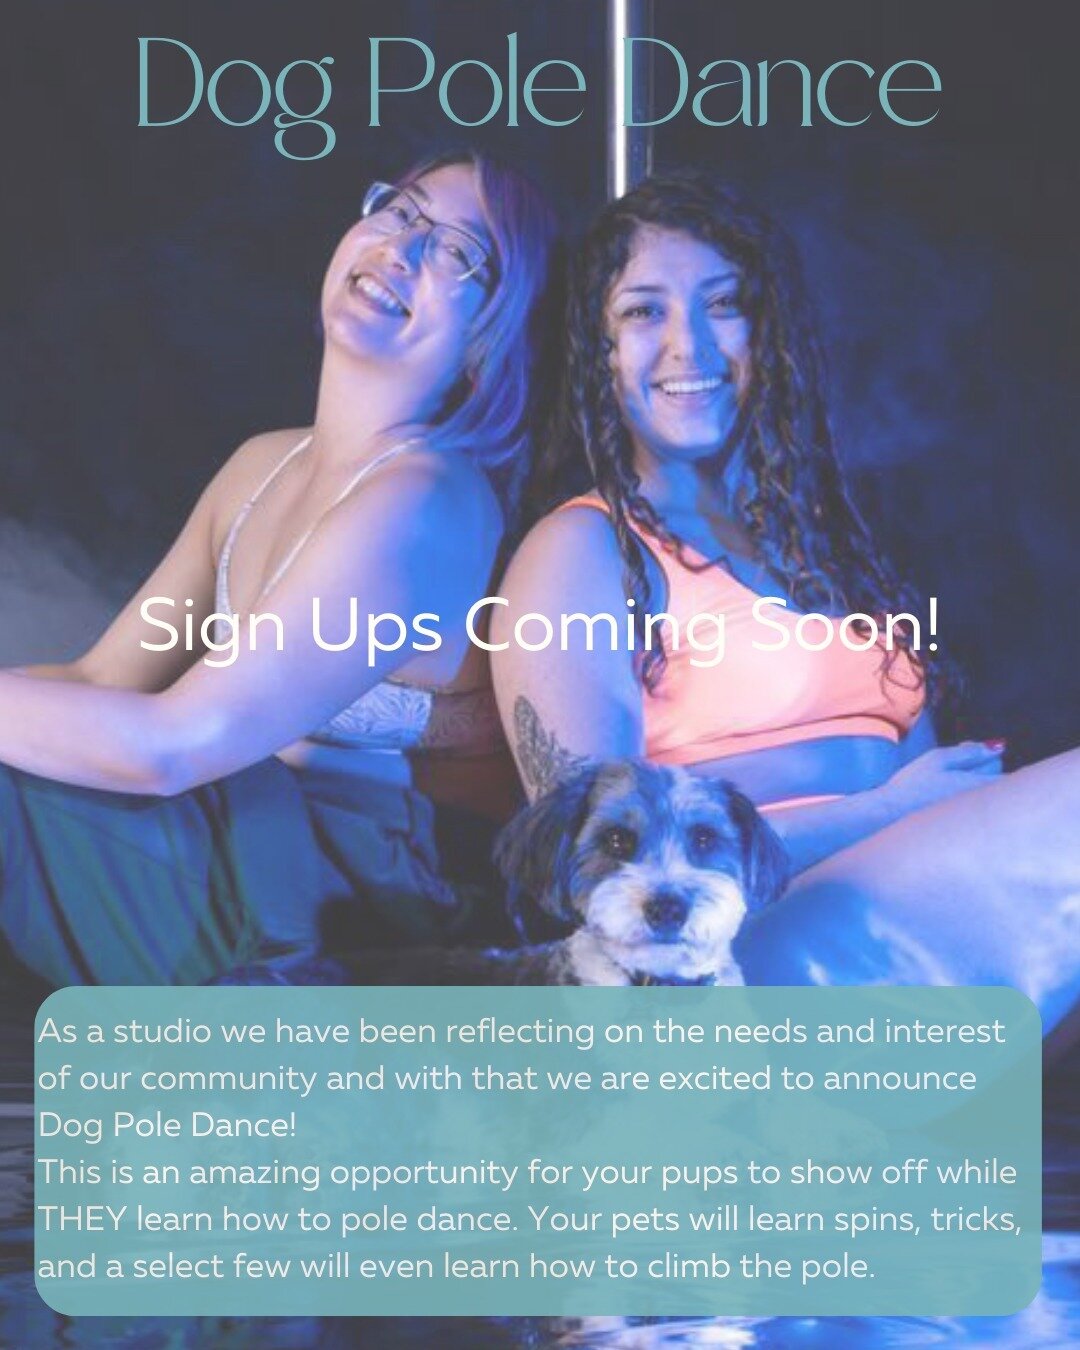 As a studio we have been reflecting on the needs and interest of our community and with that we are excited to announce Dog Pole Dance! ⁠
This is an amazing opportunity for your pups to show off while THEY learn how to pole dance. Your pets will lear